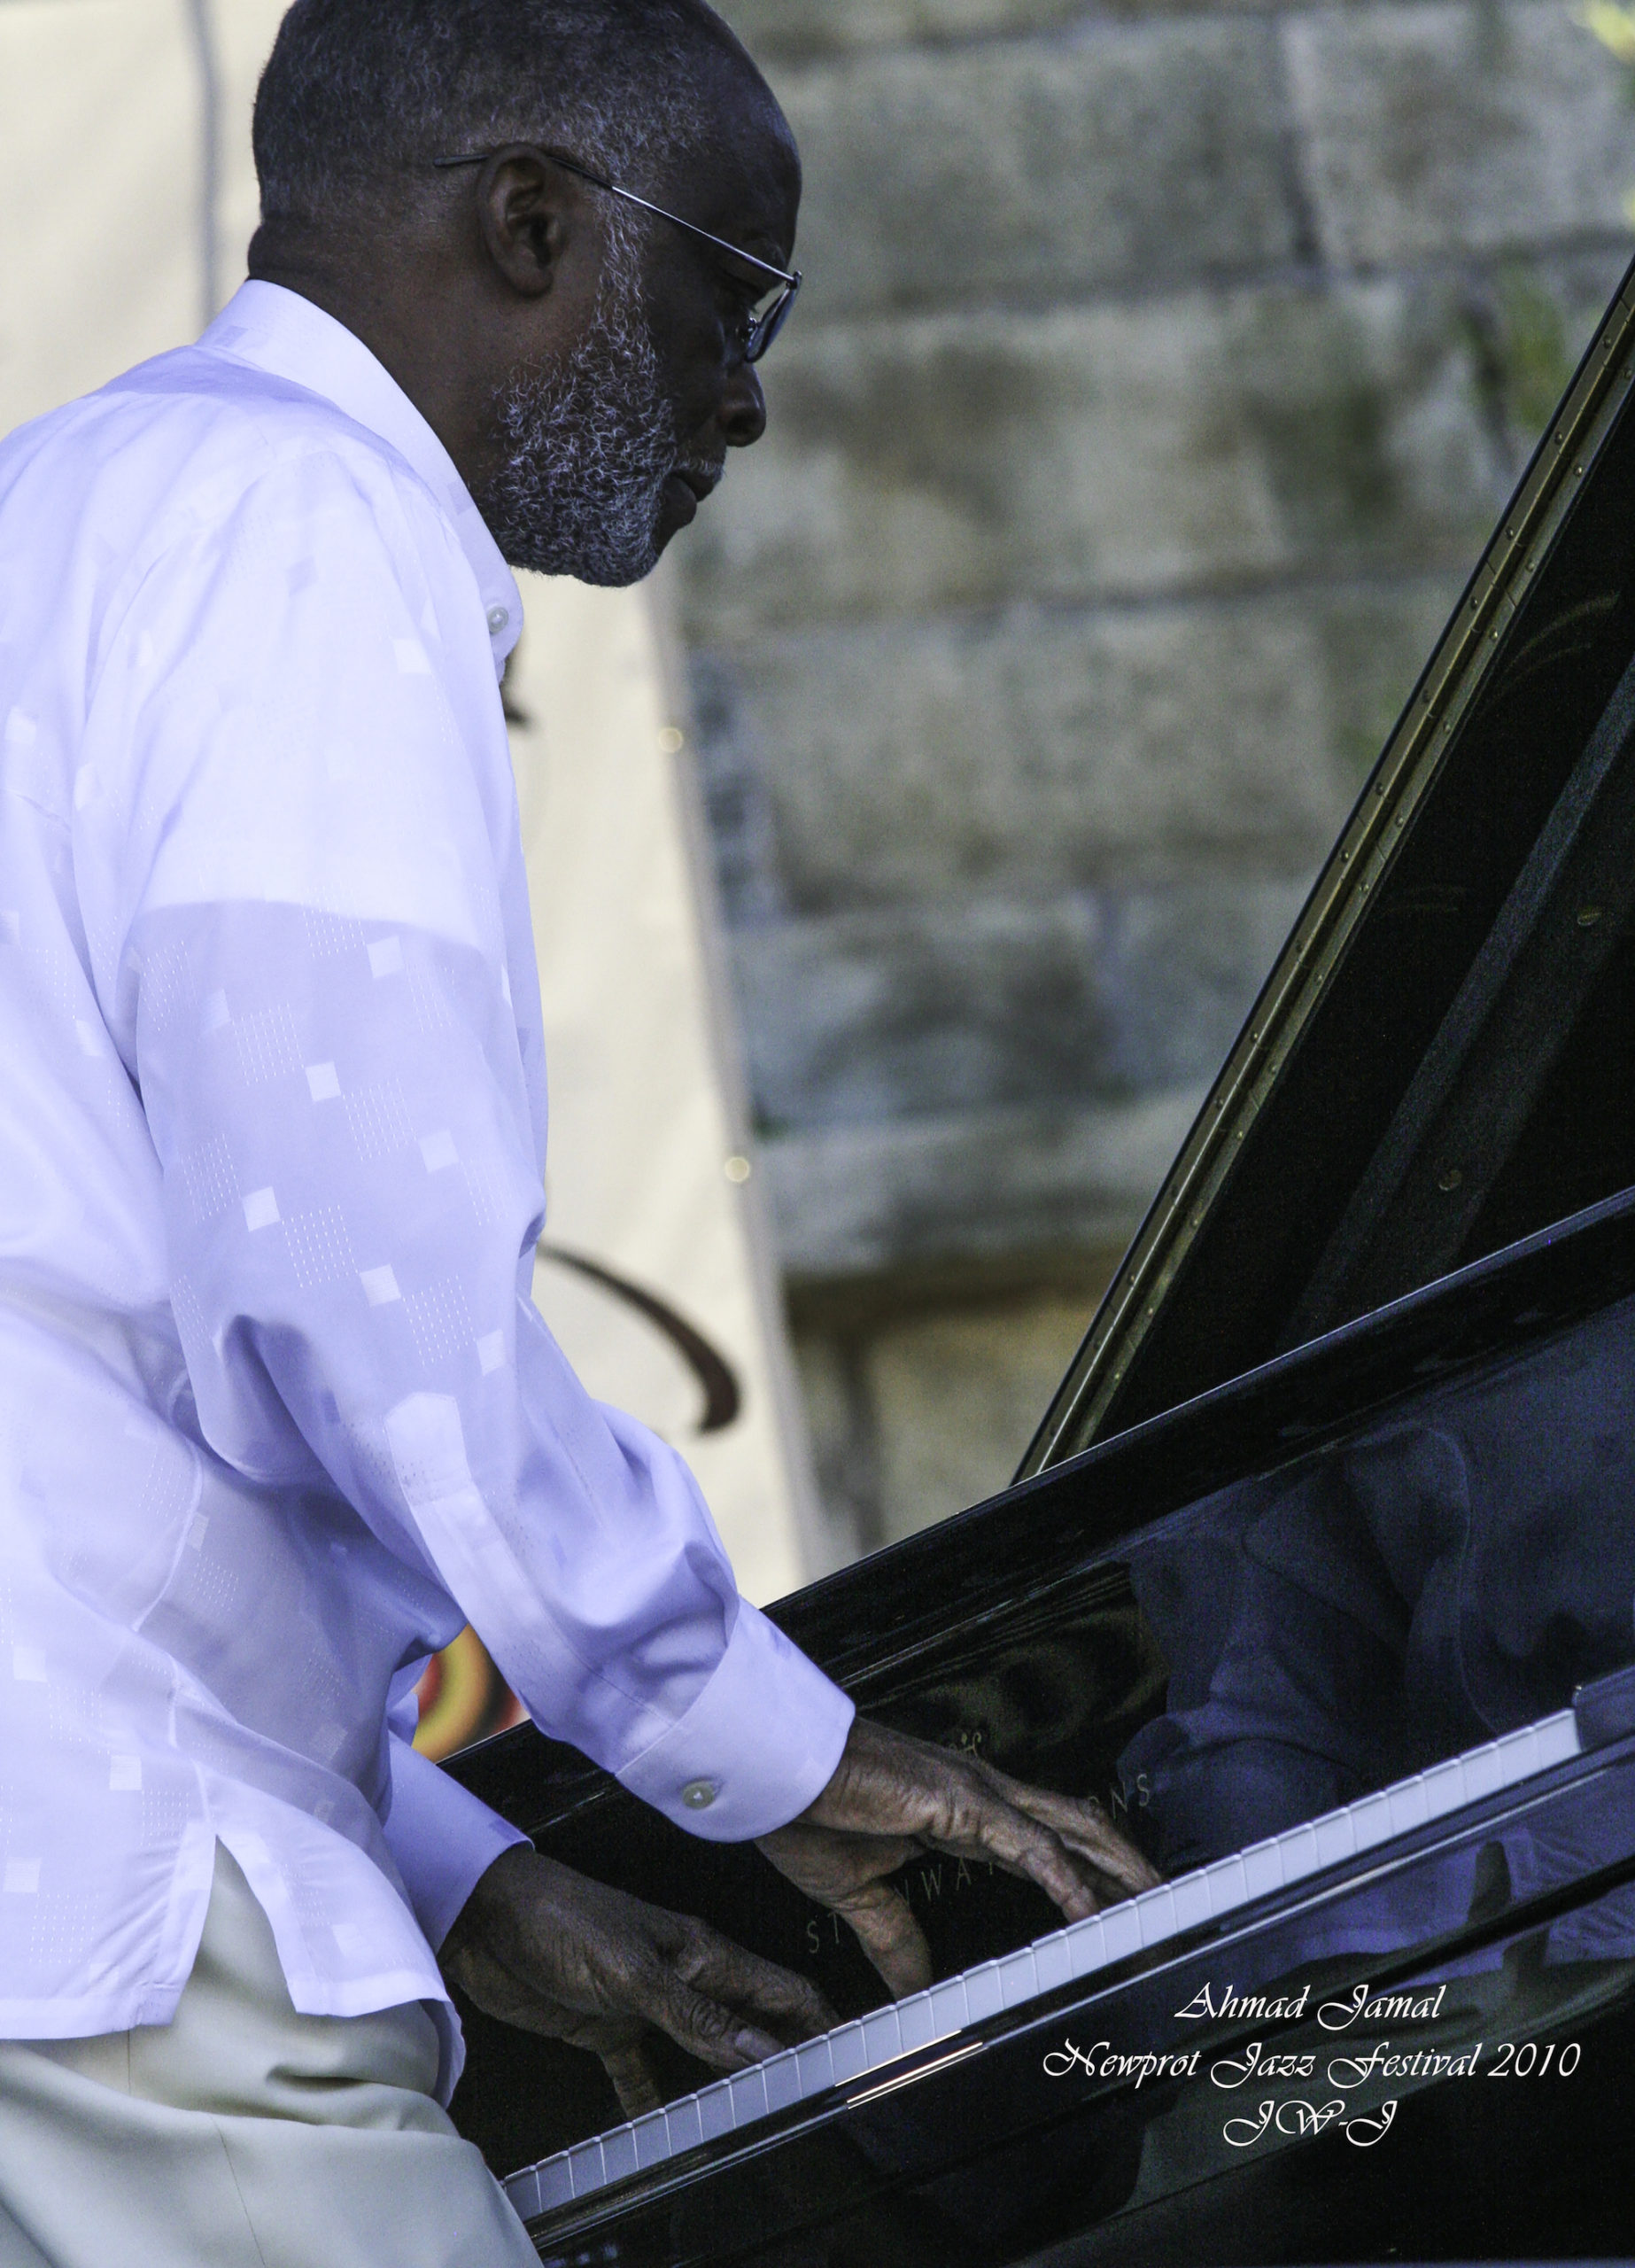 Ahmad Jamal from the piano during 2010 Newport Jazz Festival